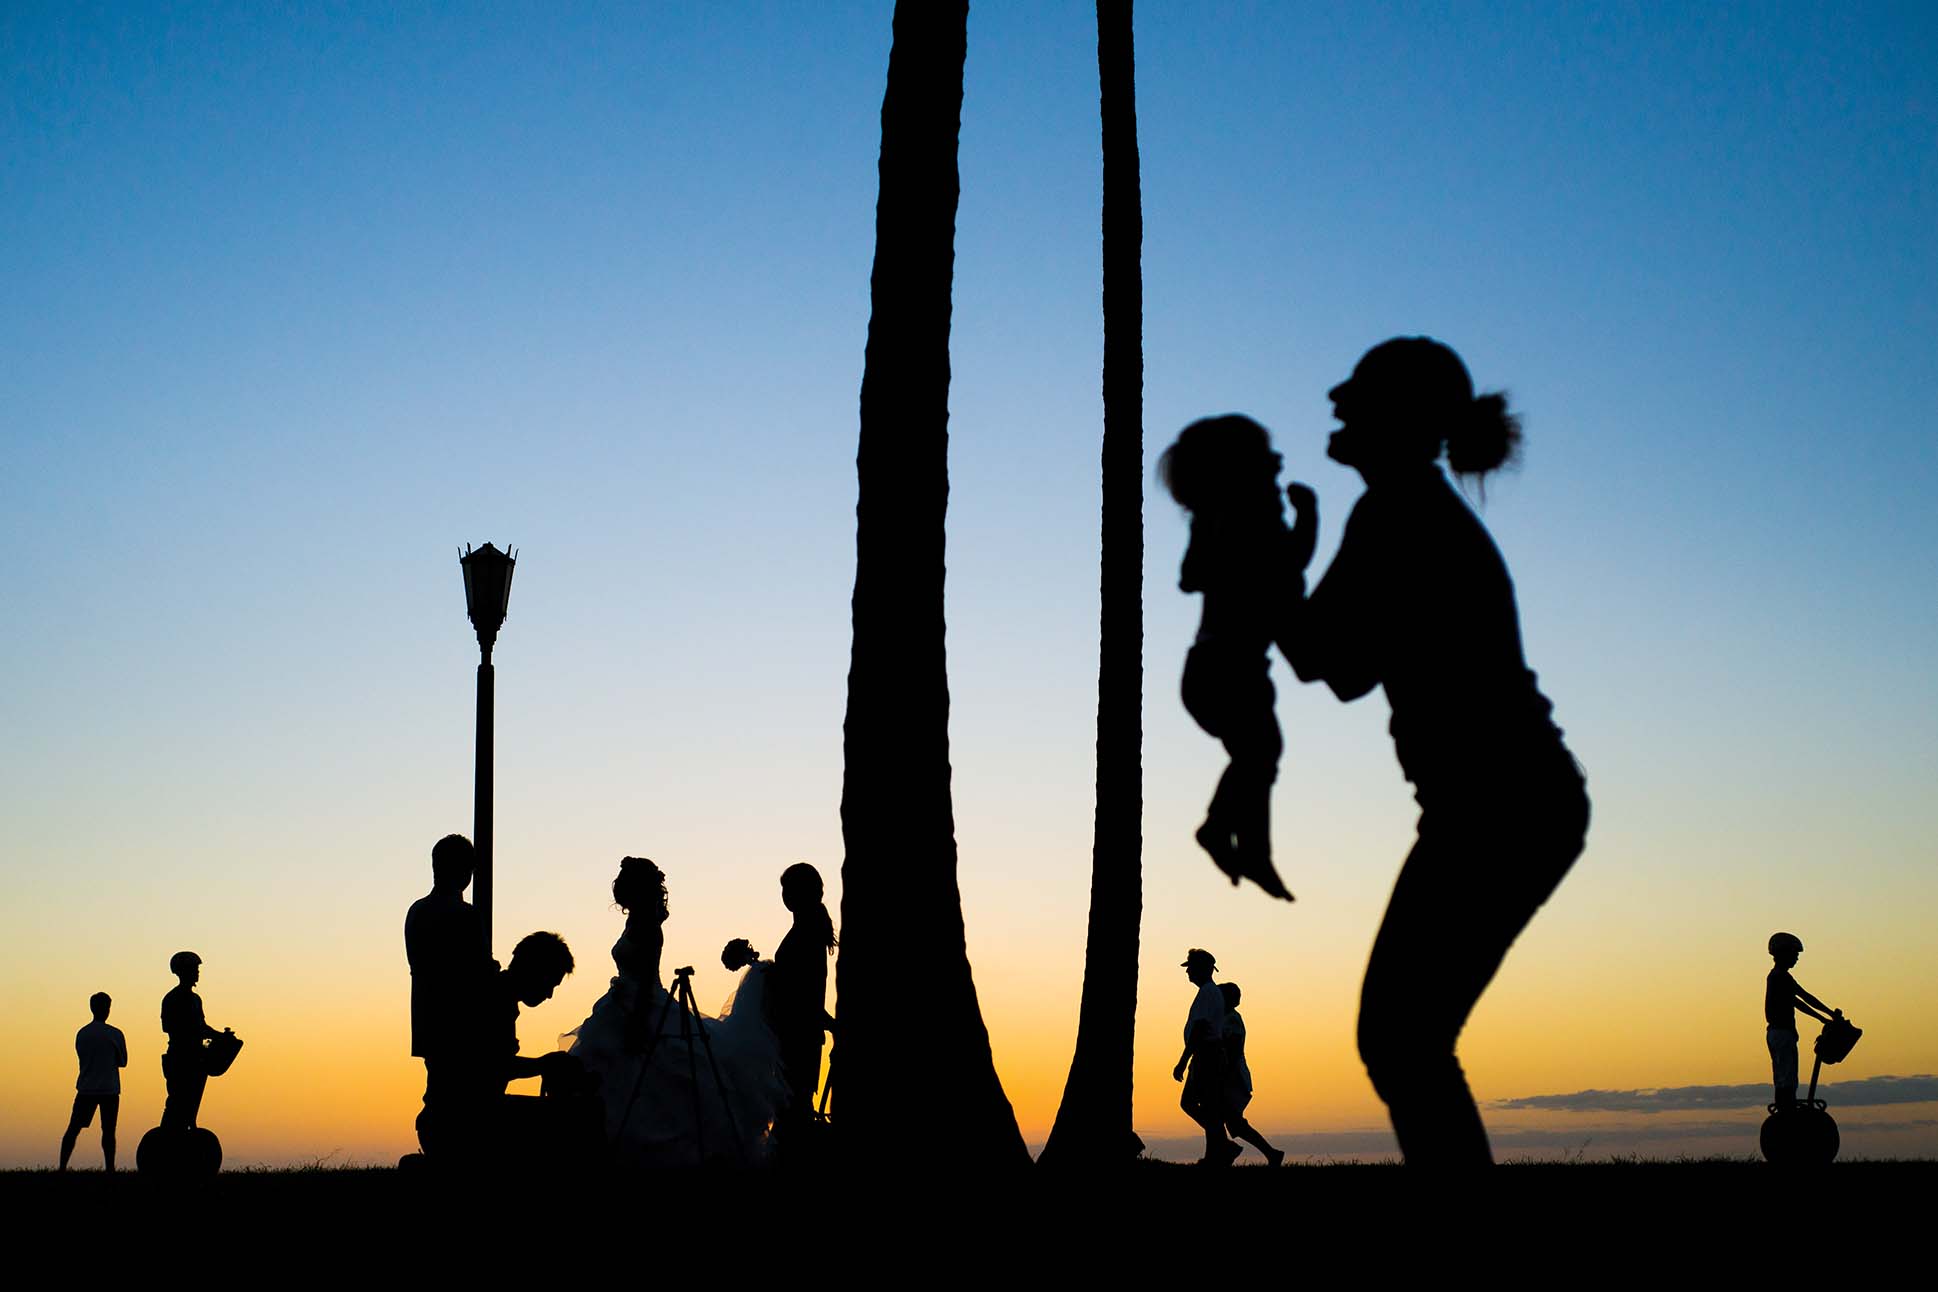 street photo of silhouettes of people on the beach in Honolulu against a sunset